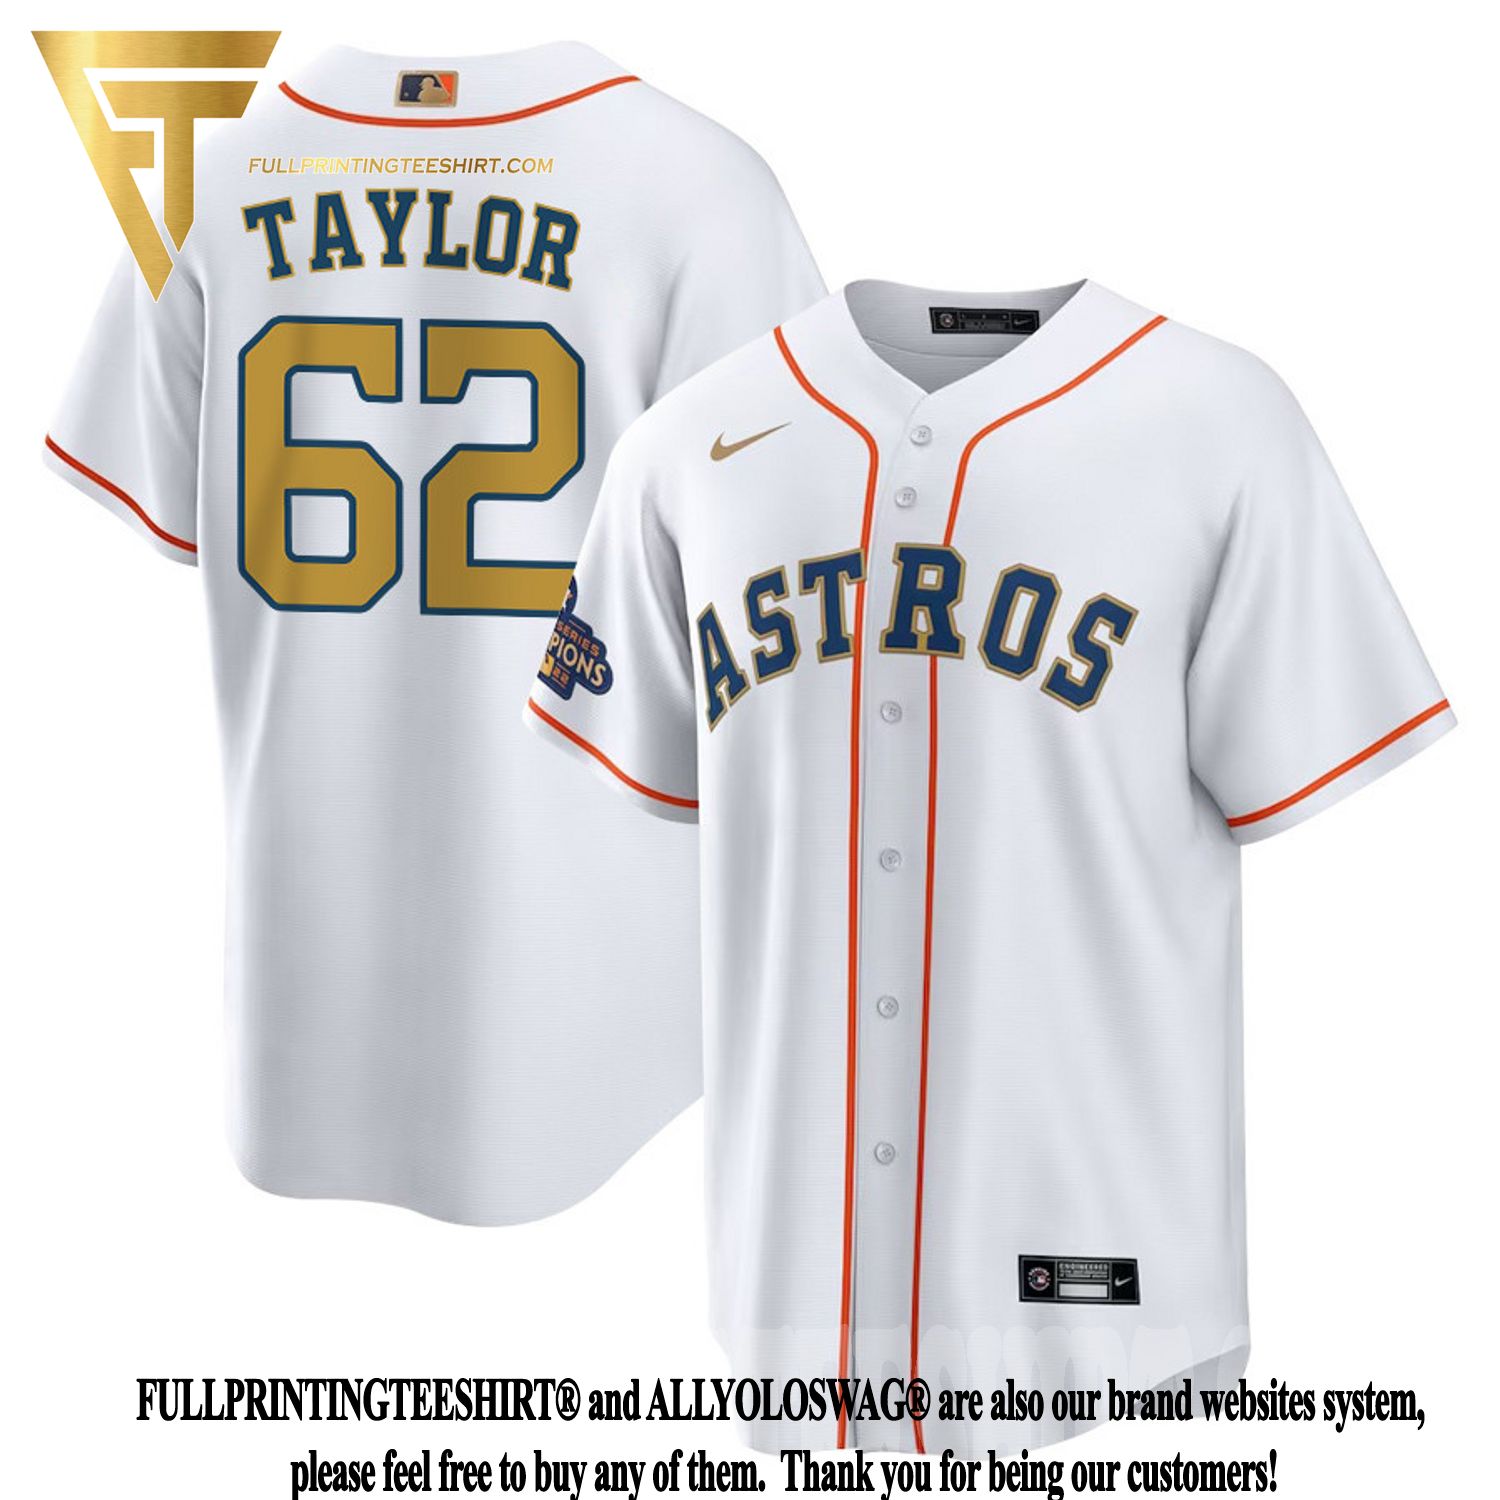 gold letter astros jersey